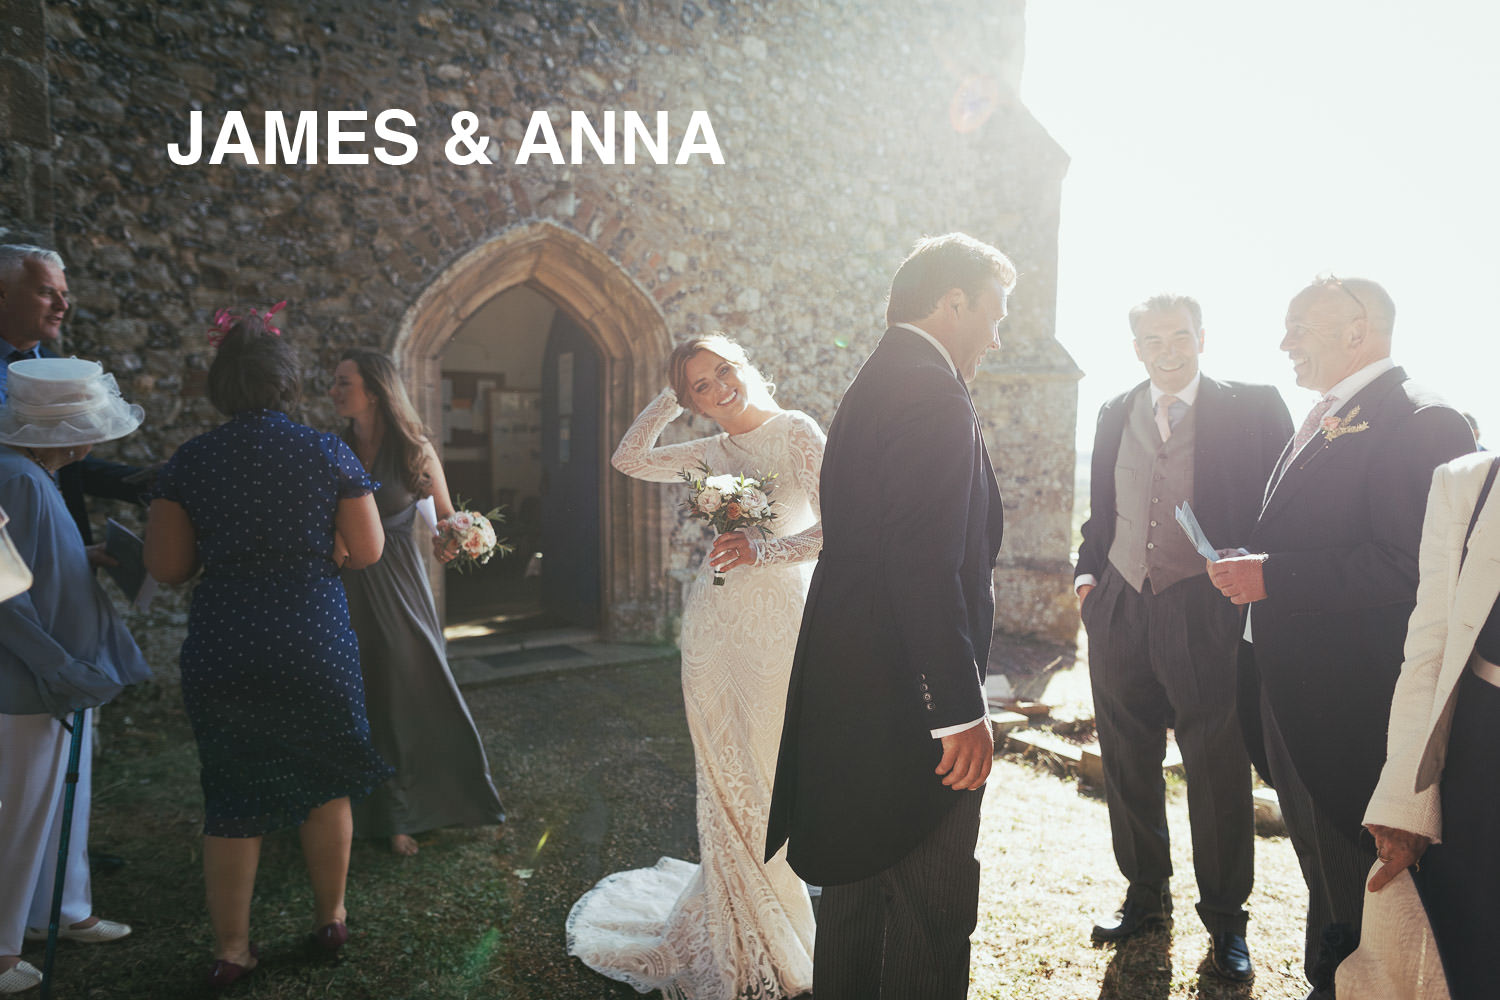 Wedding at The Church of St Mary & St Margaret in Stow Maries, near South Woodham Ferrers. Guests chat while bride, illuminated by sunlight, looks at camera. She wears a bespoke long lace wedding dress with sleeves by Louise Sullivan (Louise Bridal) dressmaker.